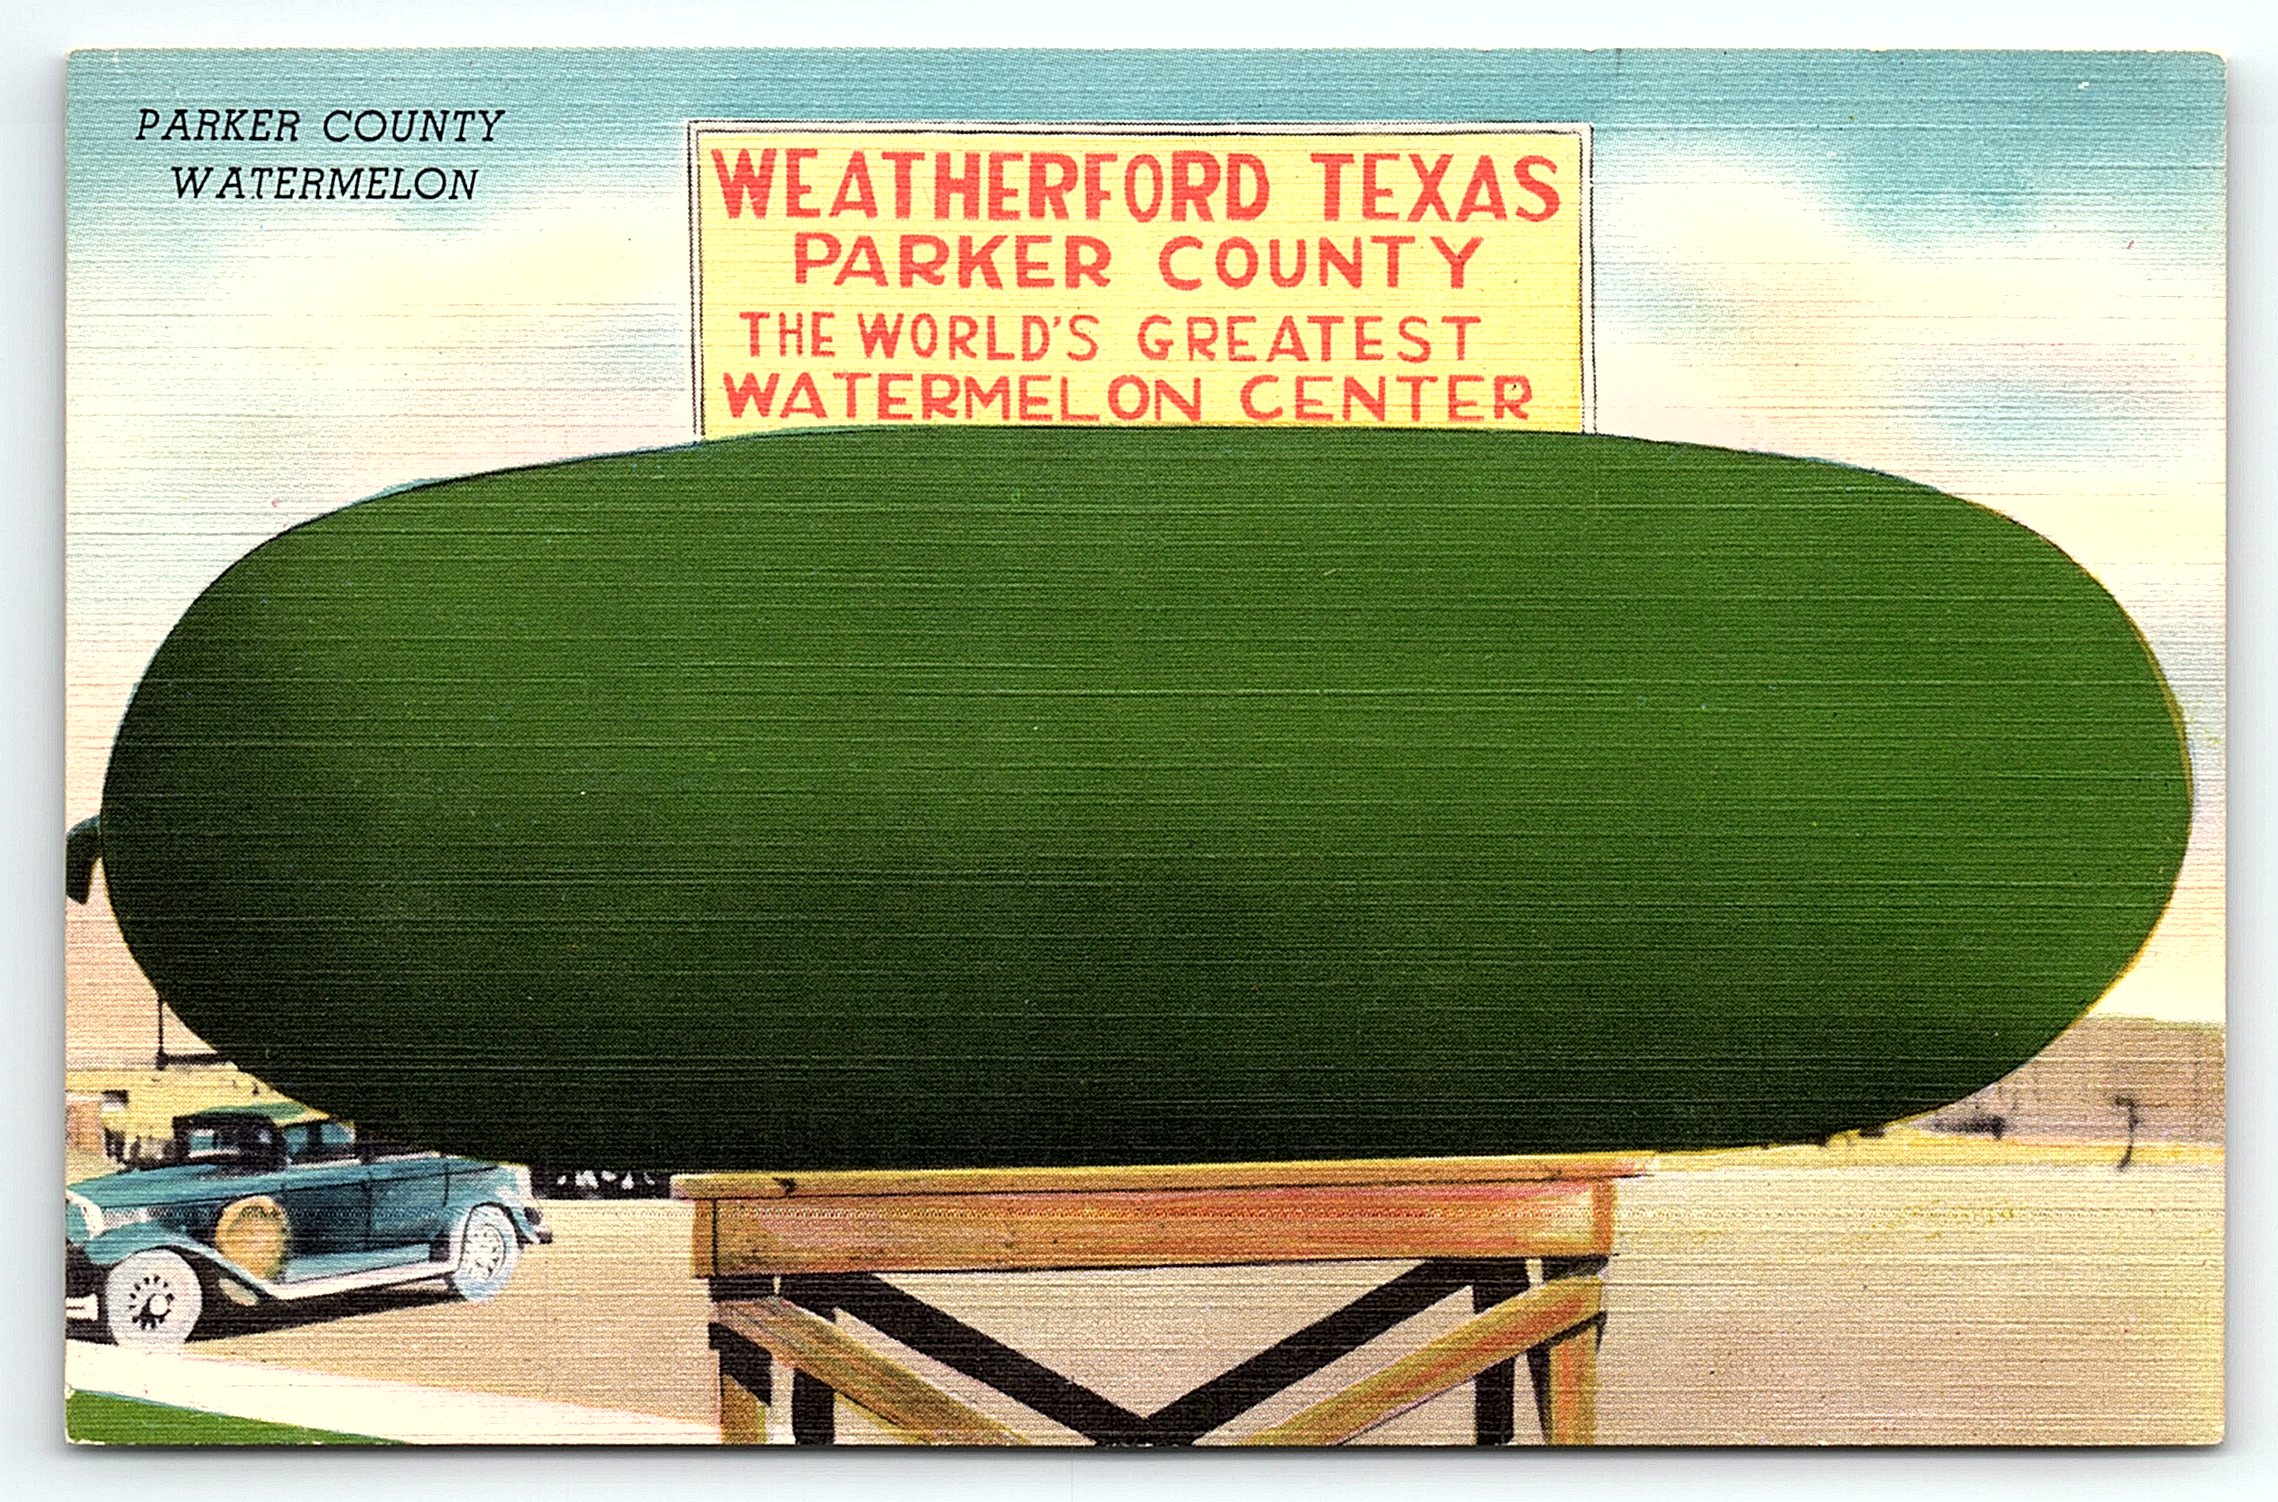 A vintage colorful postcard with a drawing of a large watermelon and a sign reading "Weatherford Texas Parker County, The World's Greatest Watermelon Center"